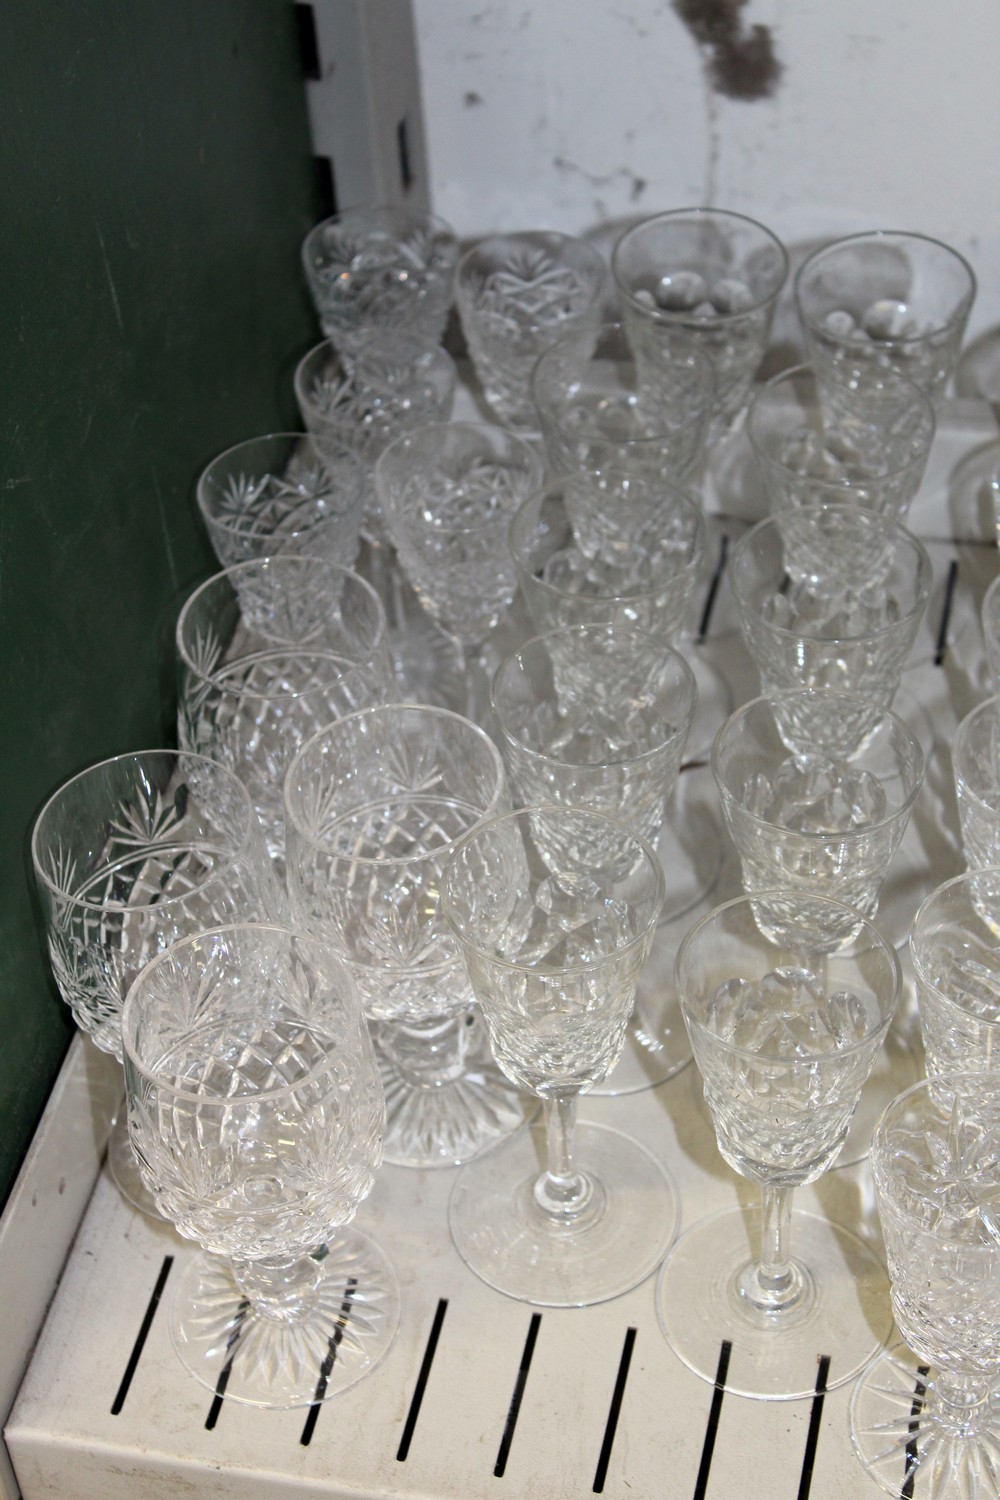 A shelf of cut glass drinking glasses. - Image 2 of 5